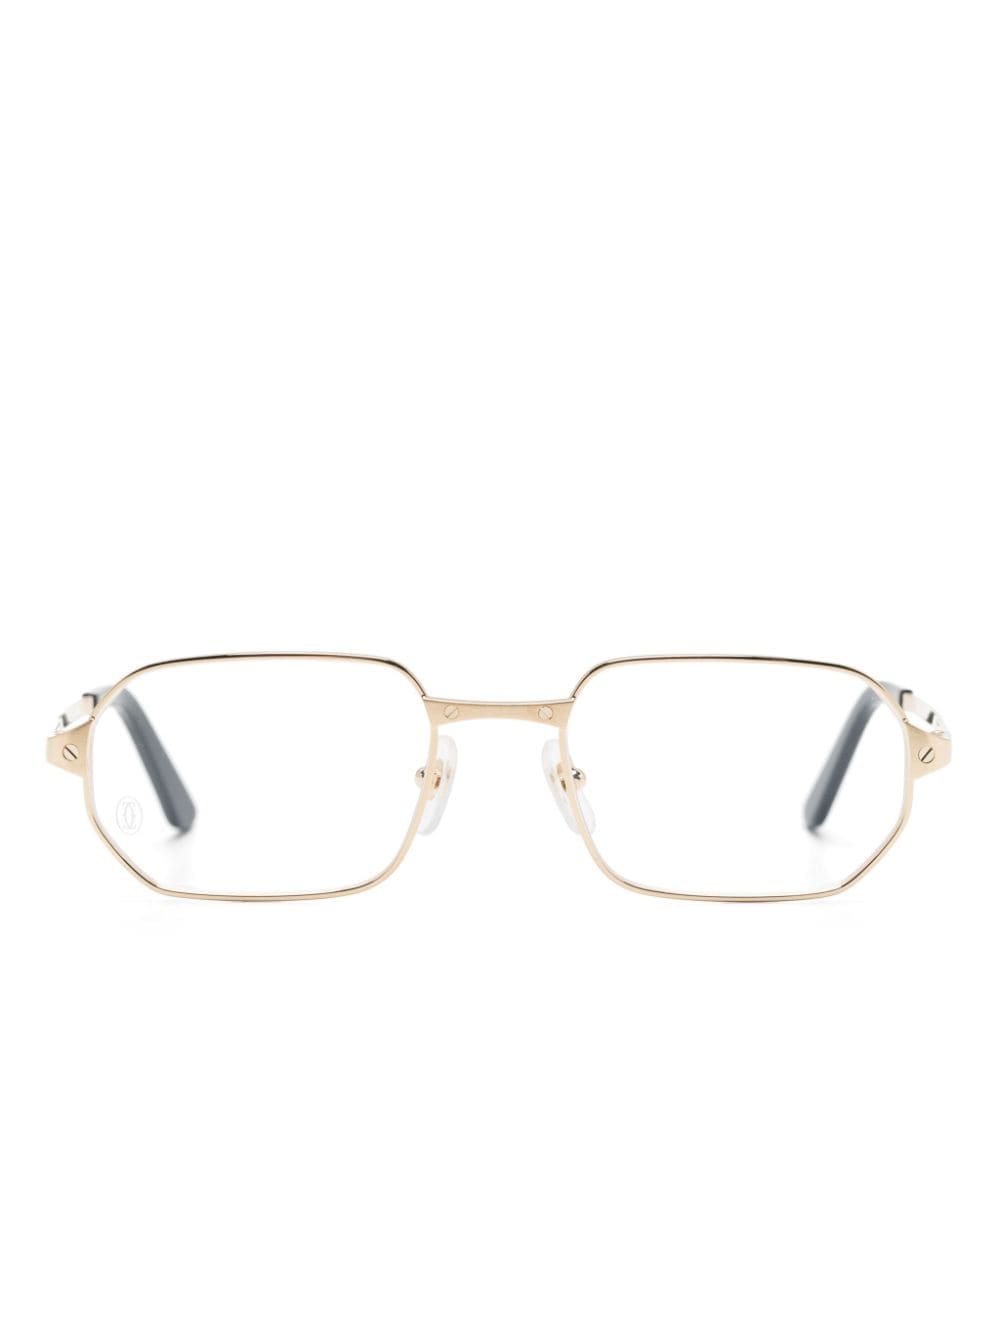 Cartier Square-frame Metallic Glasses In Gold